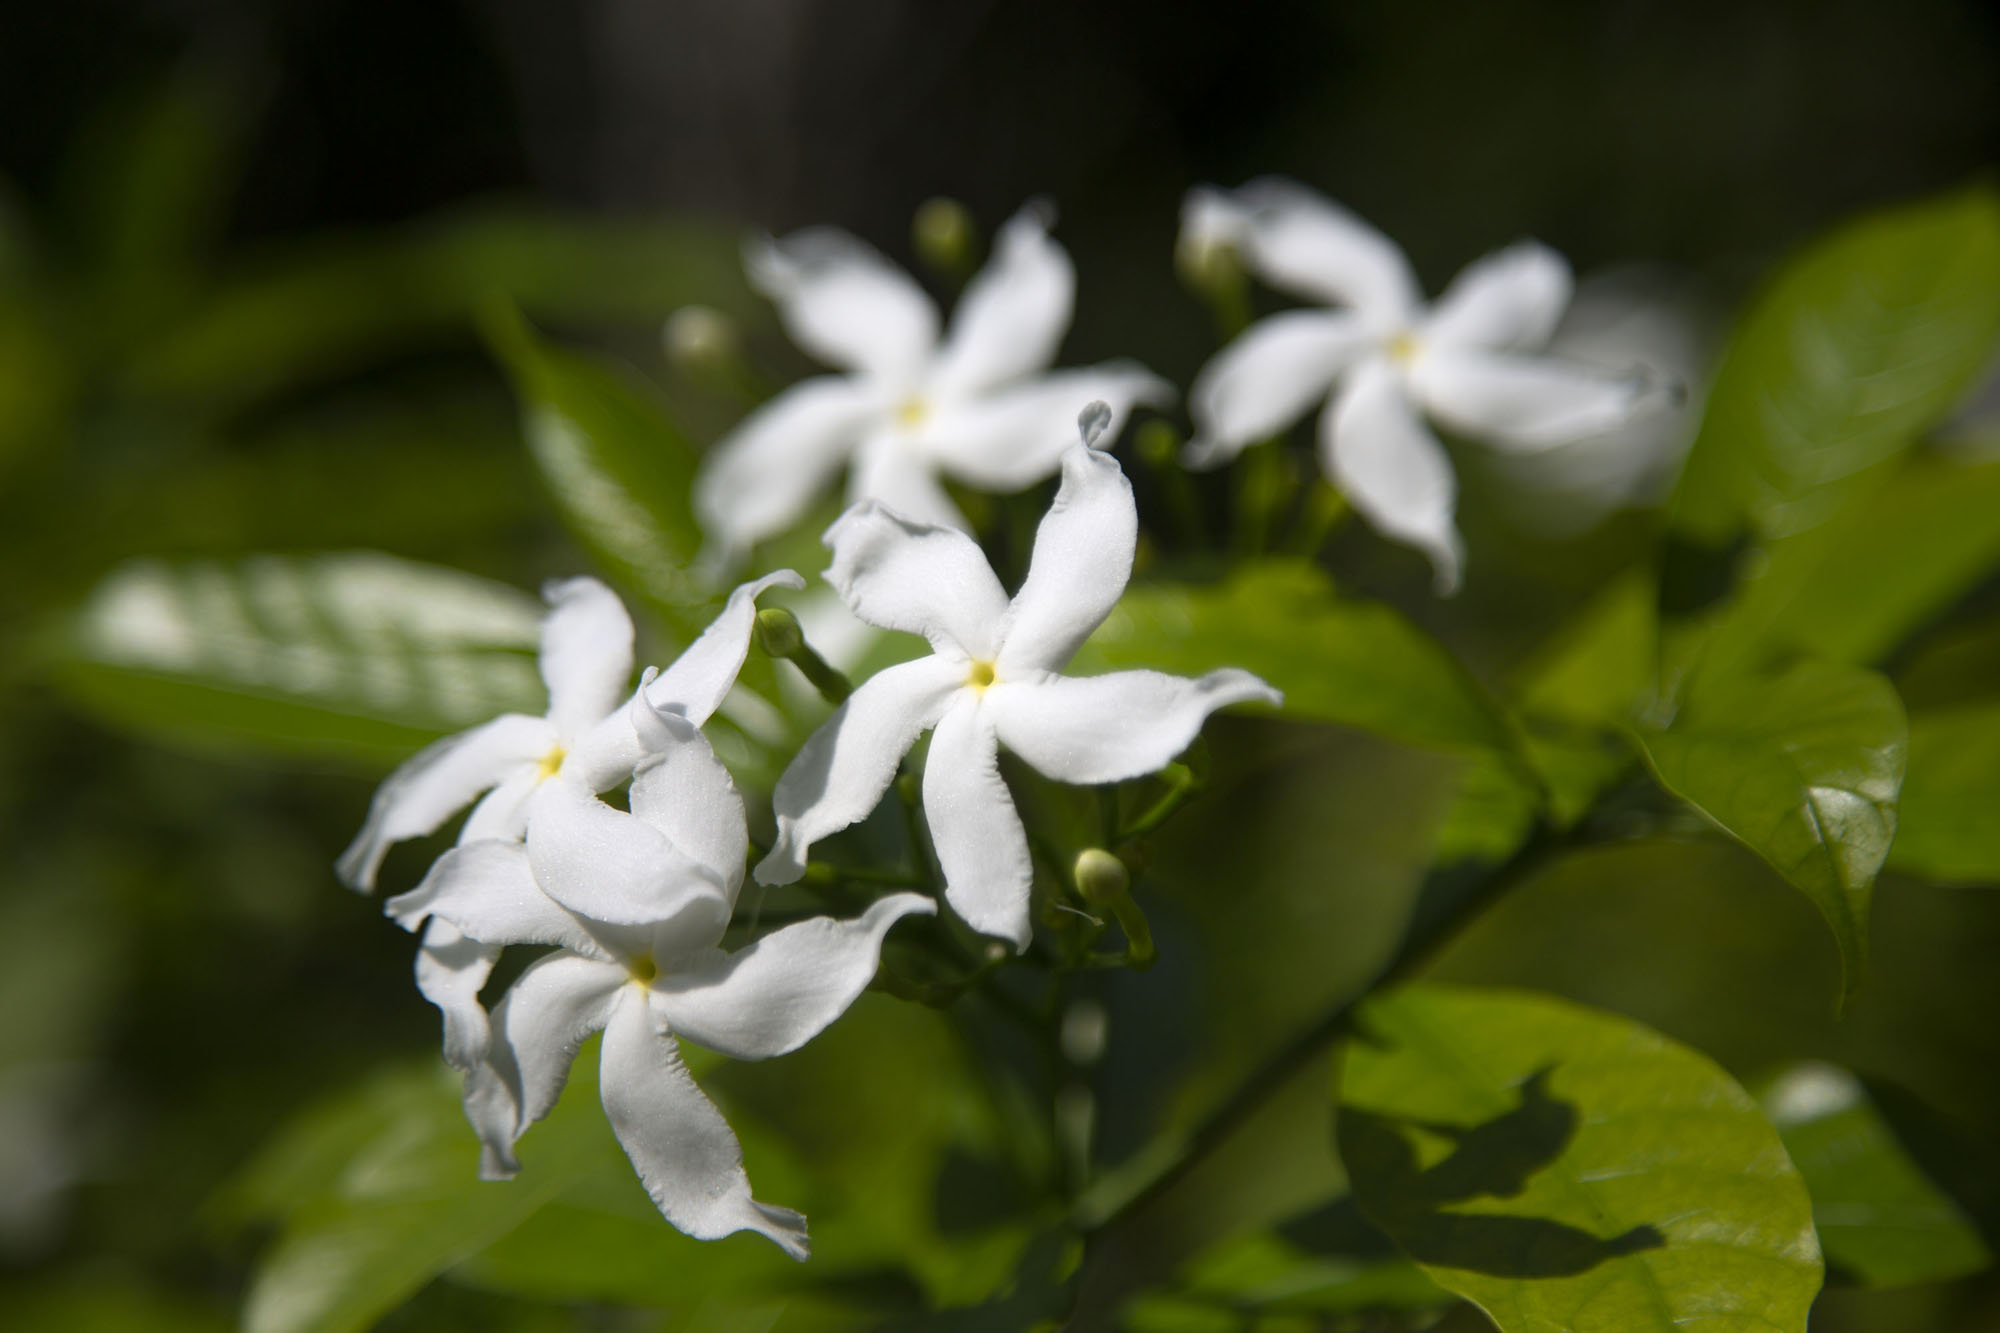 Picture of Milkwood pinwheel flowers can be seen all over the botanic gardensSingapore - Singapore